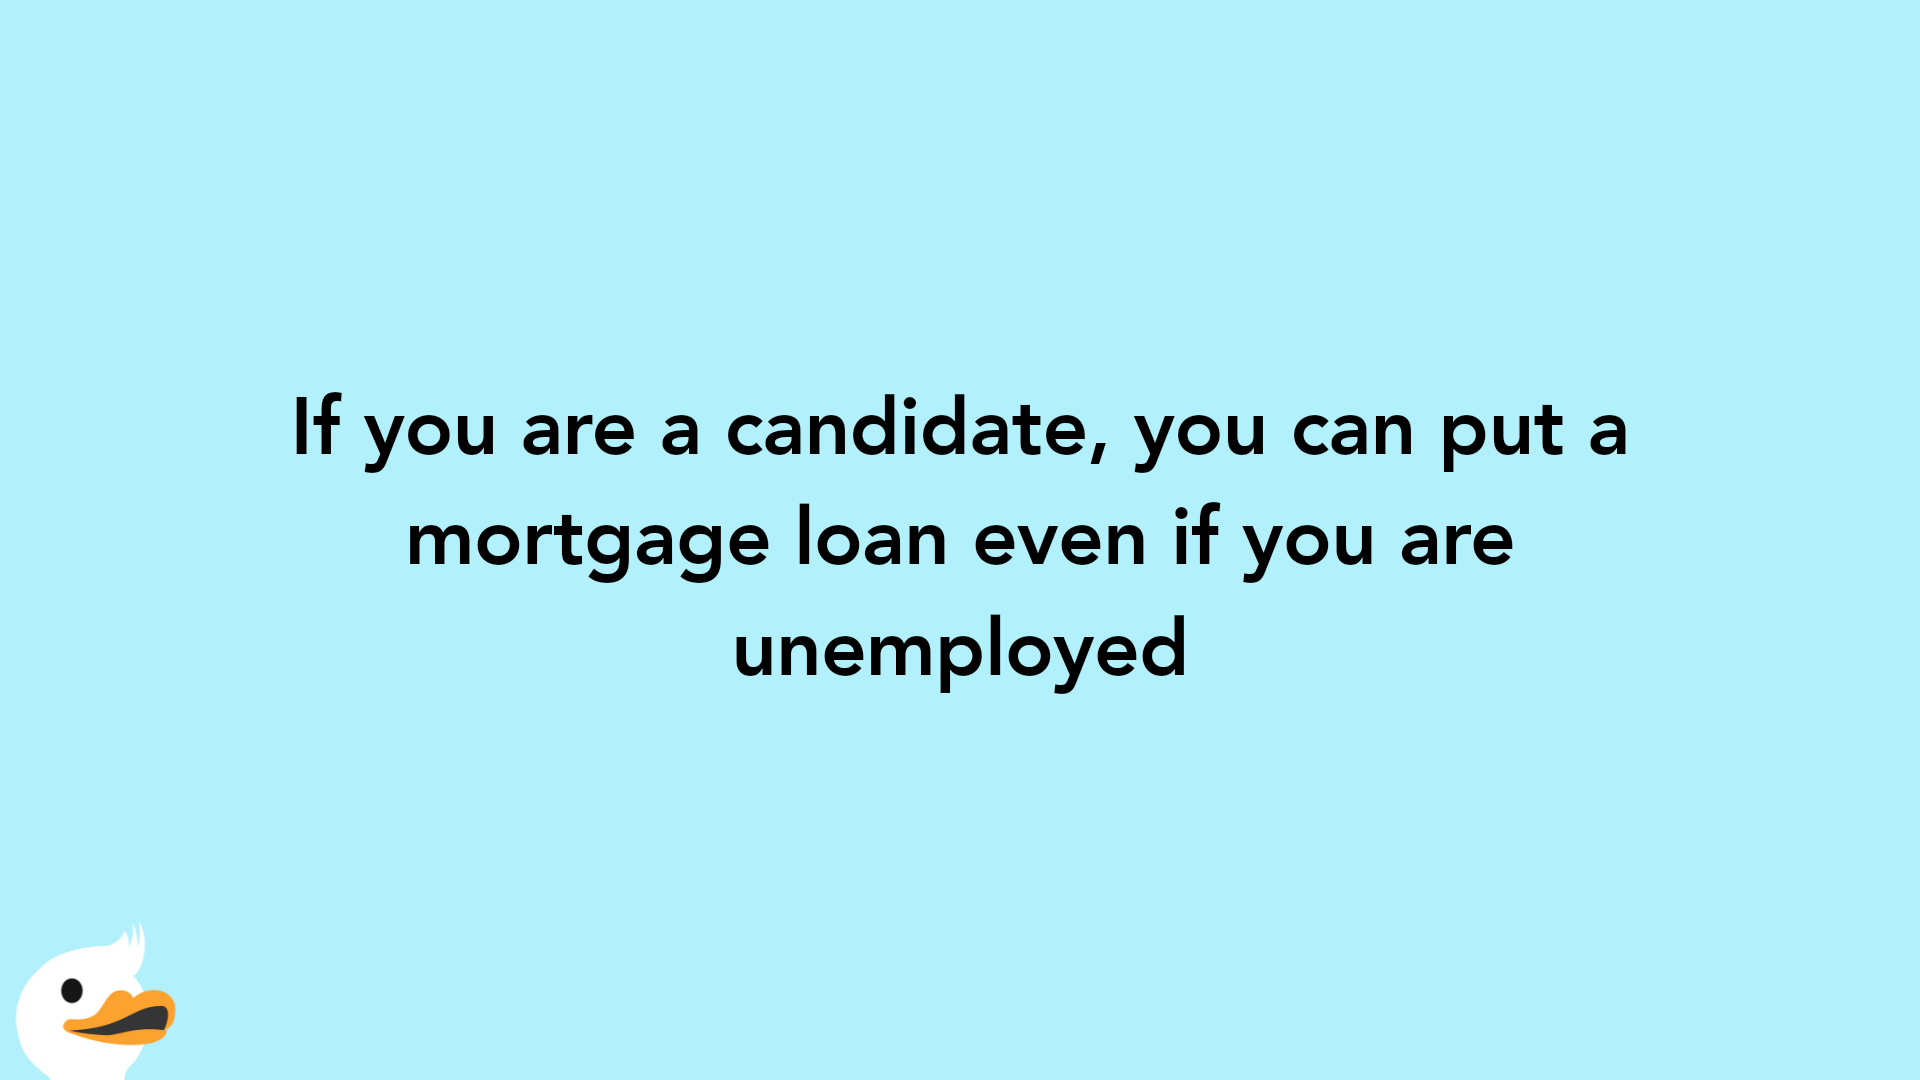 If you are a candidate, you can put a mortgage loan even if you are unemployed